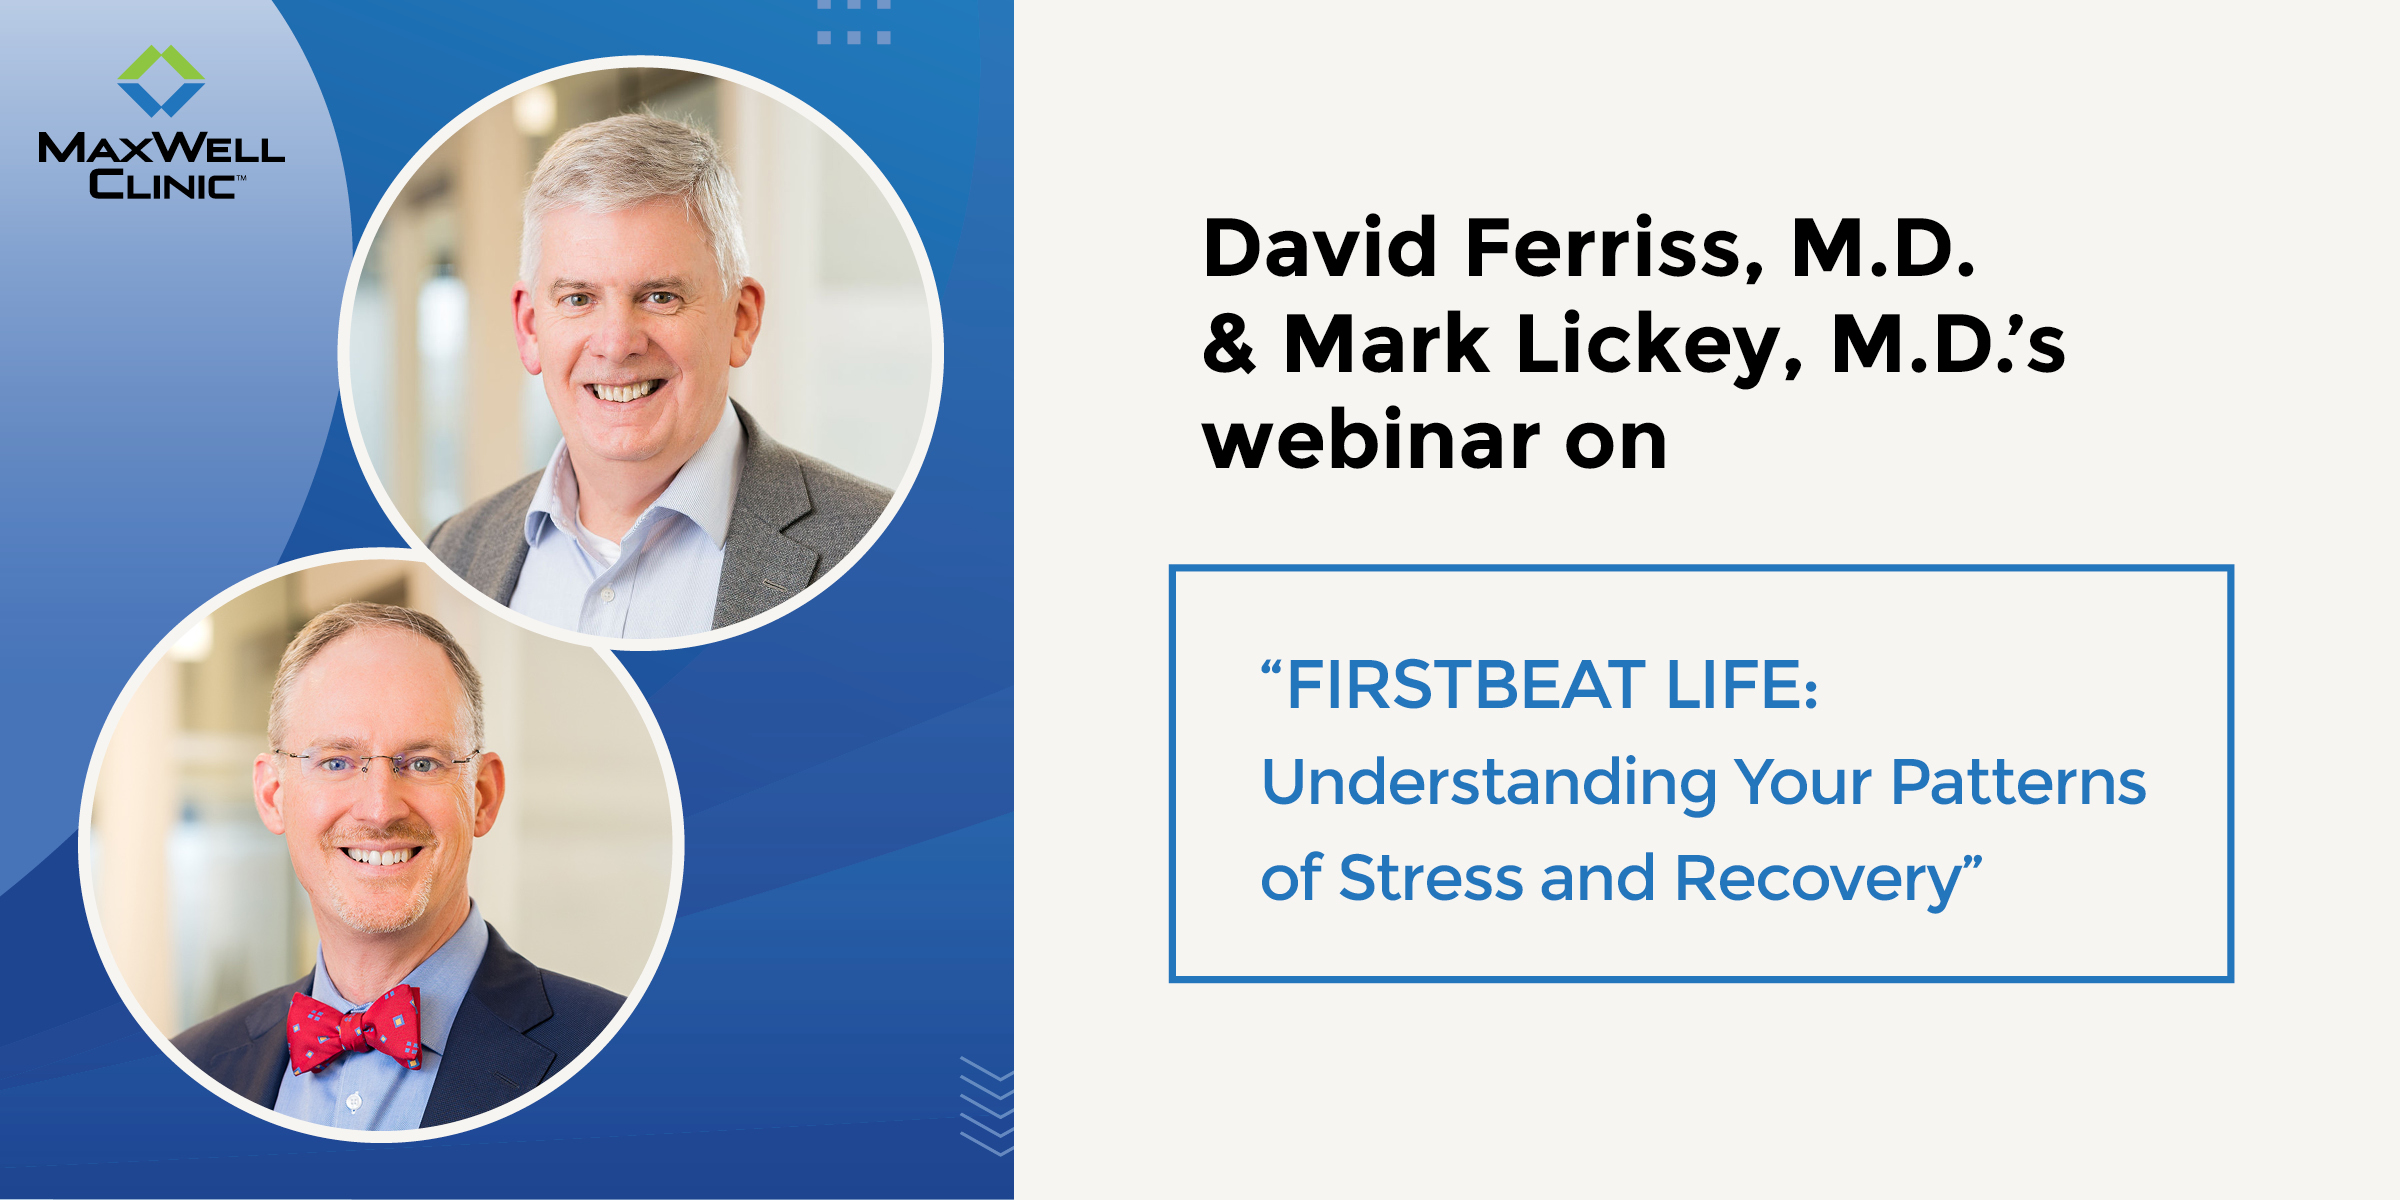 Firstbeat Life: Understanding Your Patterns of Stress and Recovery